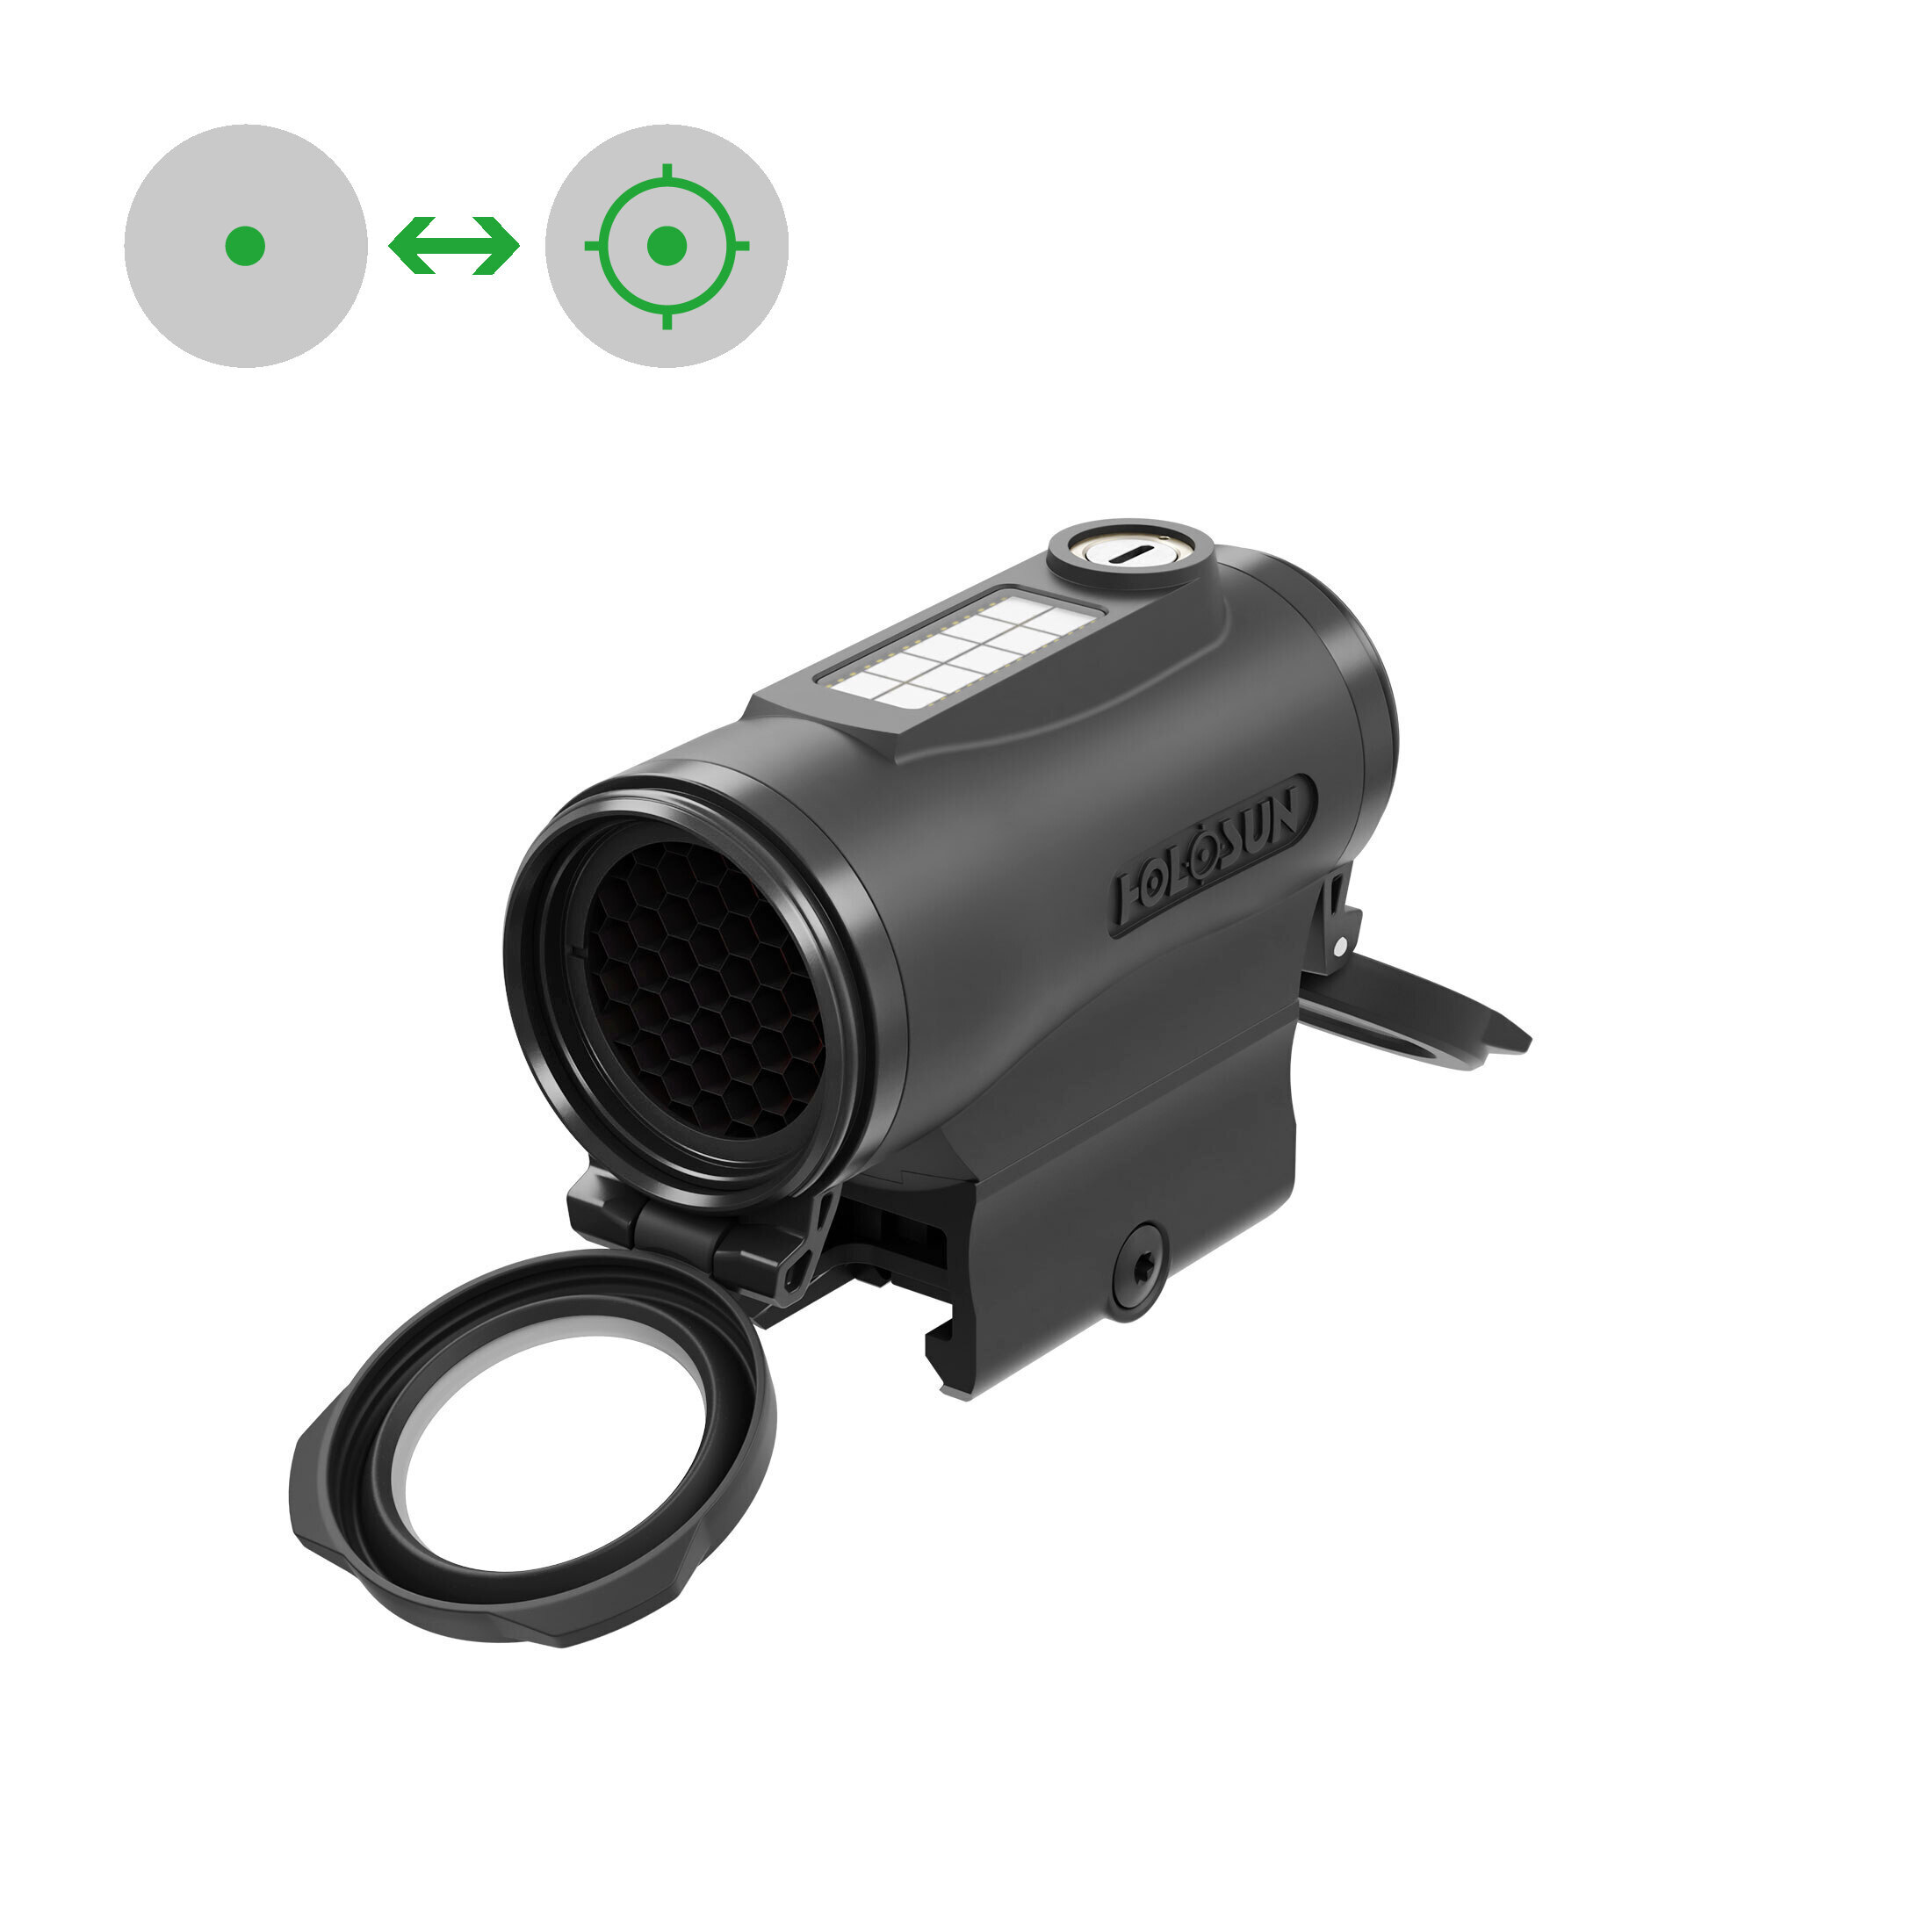 Holosun Green Dot Sight HE530C-GR switchable between Circle Dot and Single Dot, solar cell and a fu…